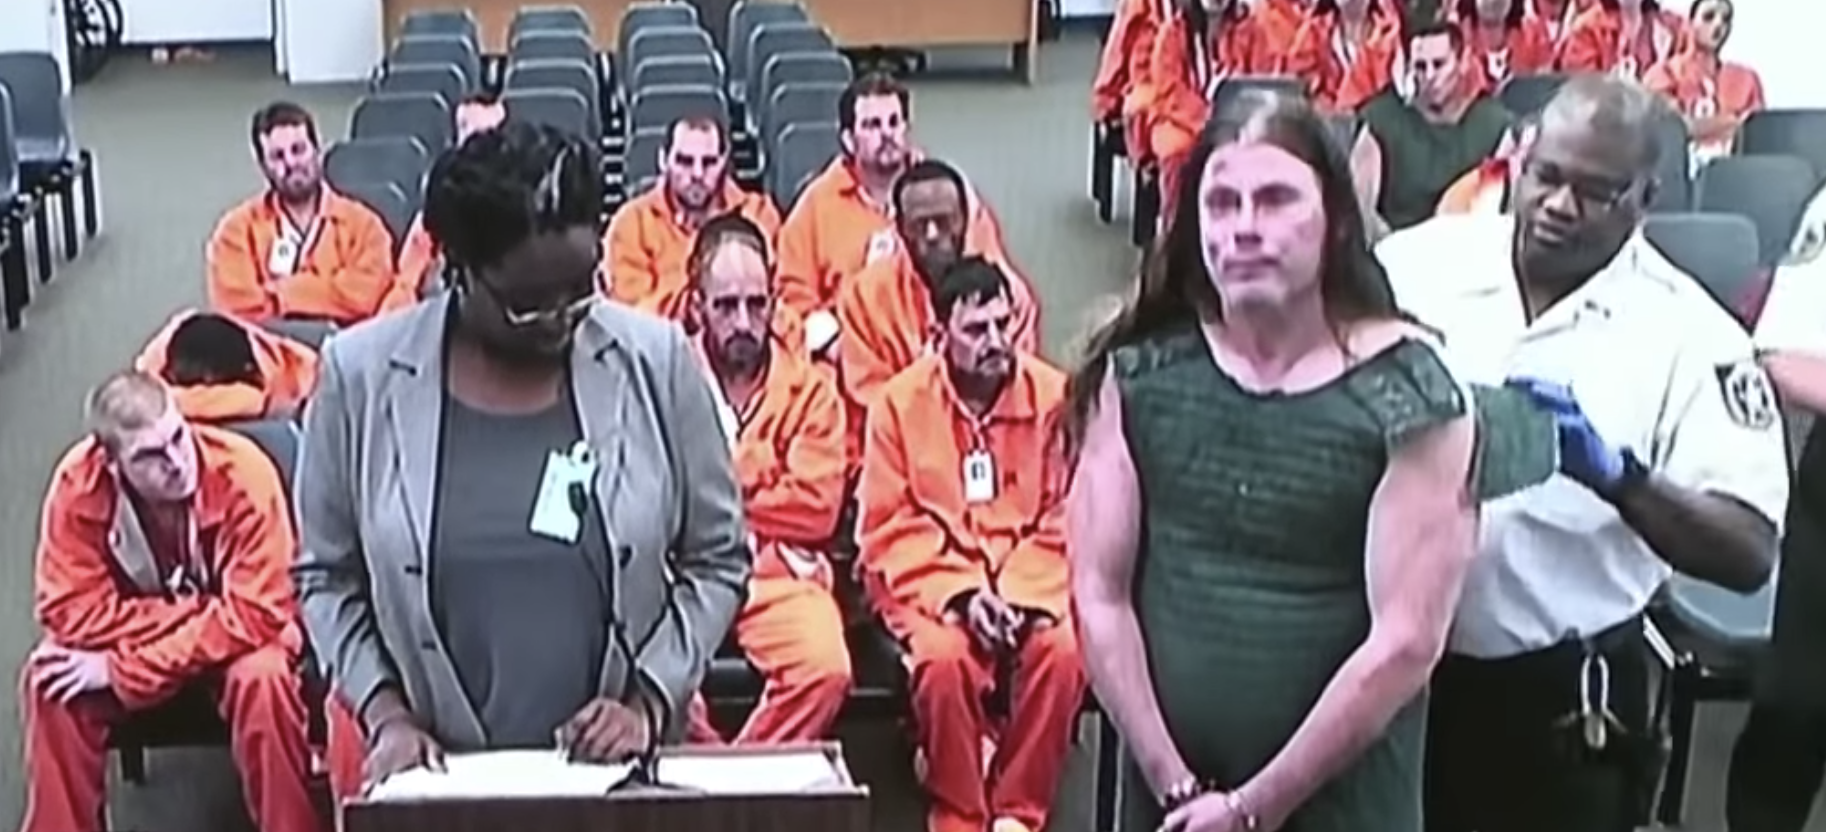 Cannibal Corpse guitarist Pat O’Brien makes first court appearance following arrest